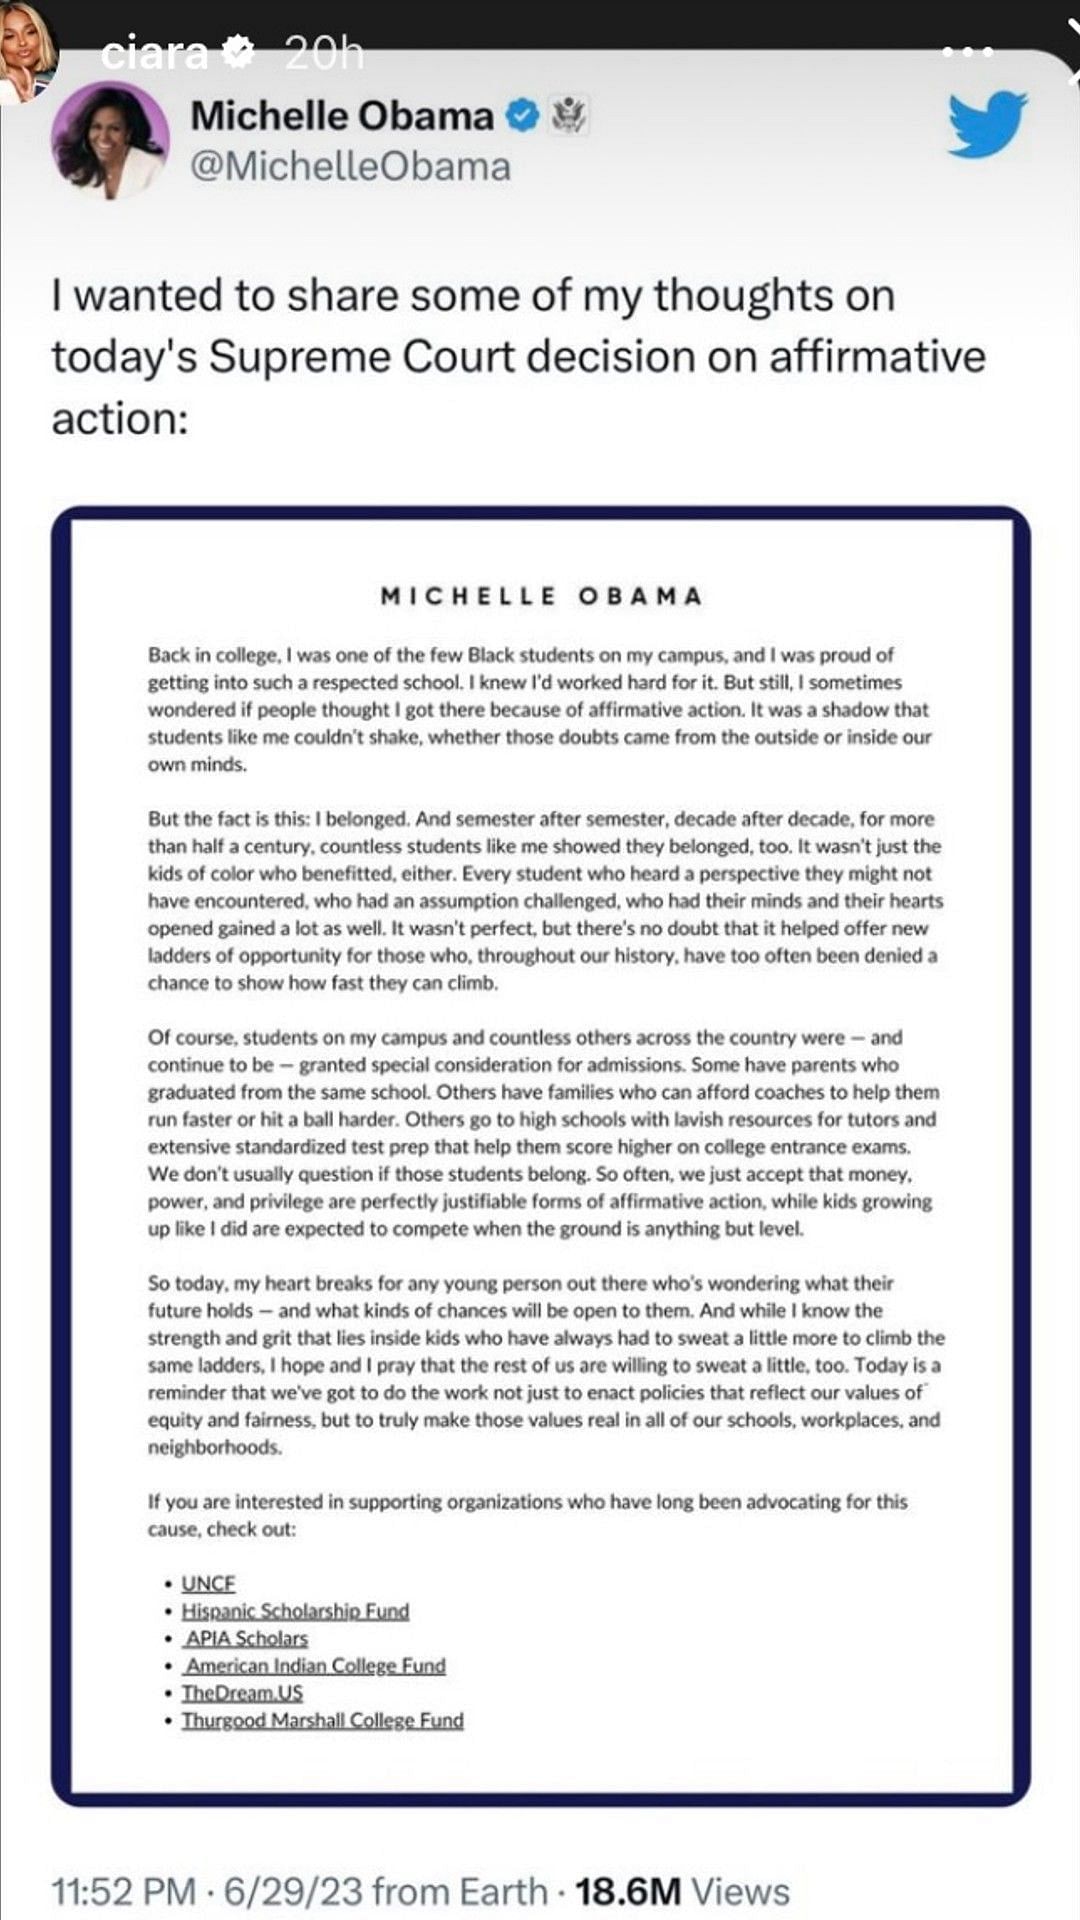 A post from former First Lady Michelle Obama that was re-shared by Ciara Wilson.